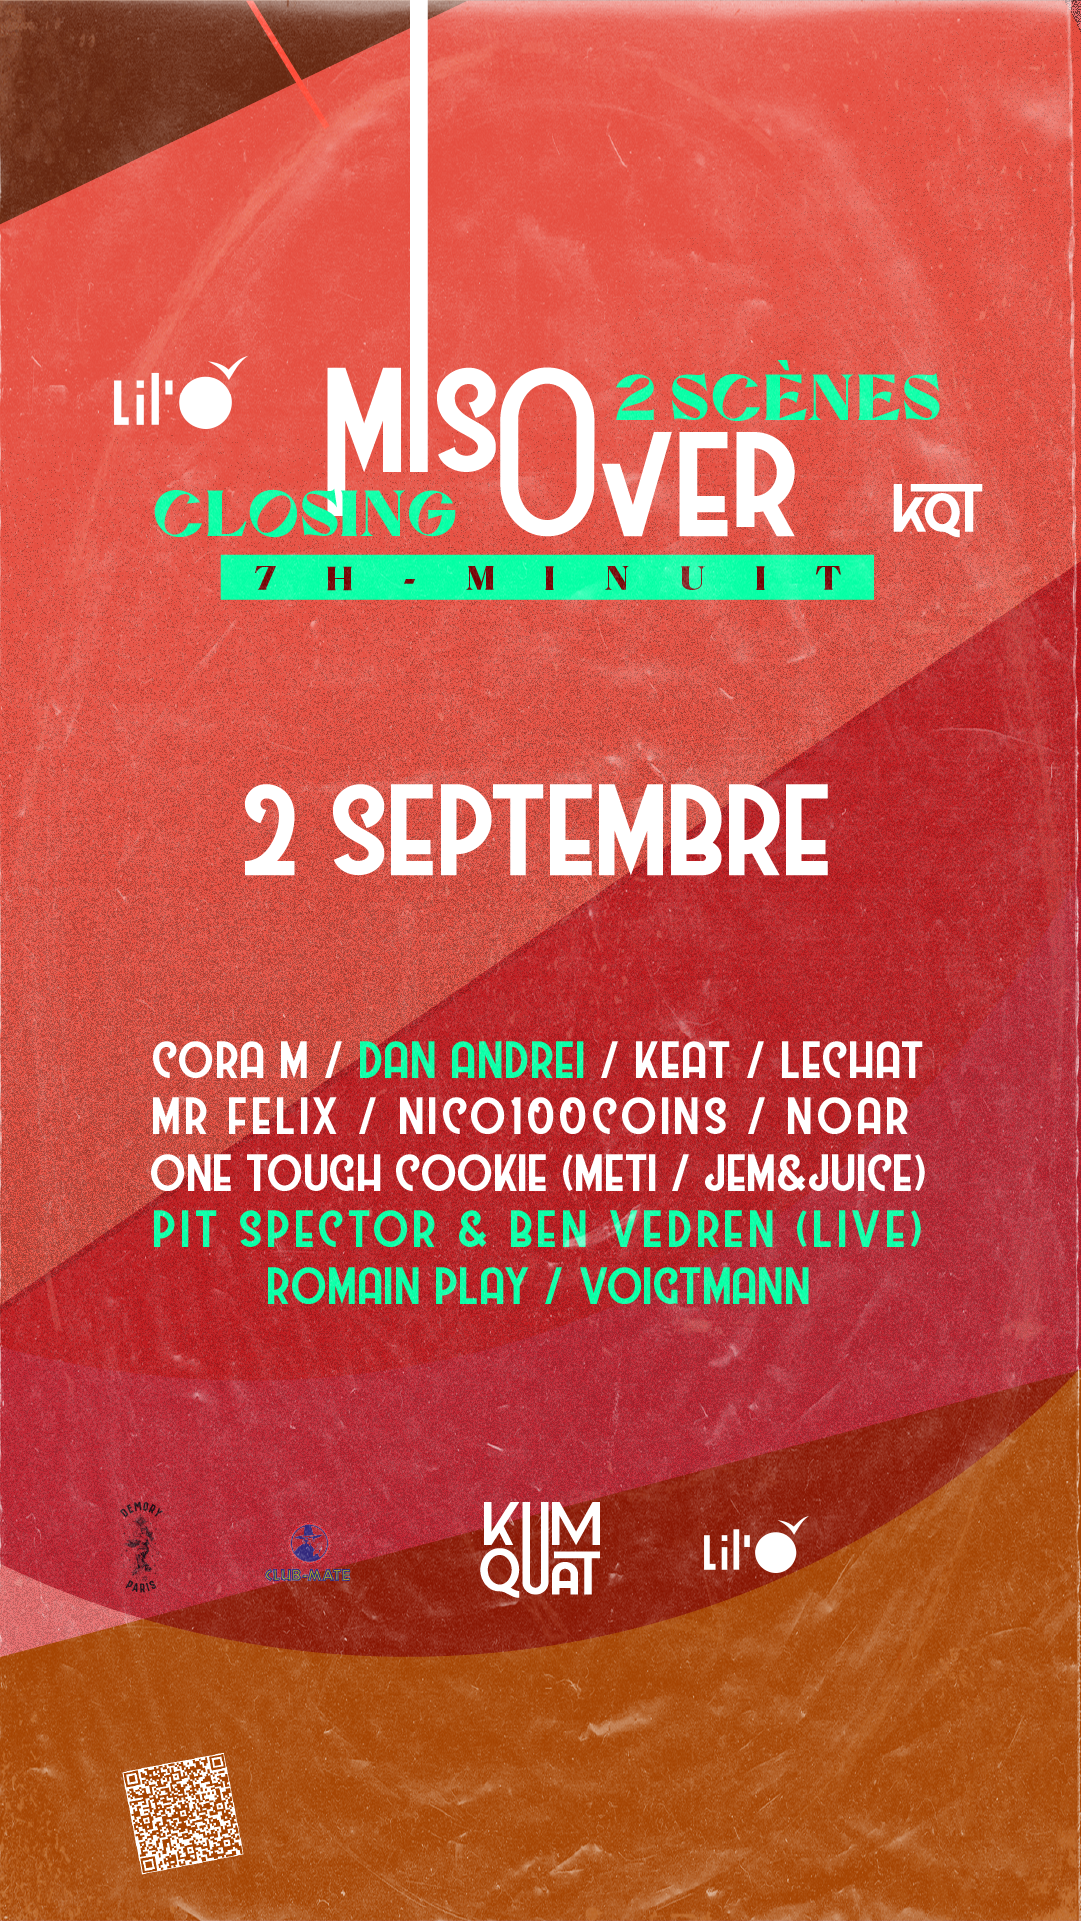 MISOVER #4 W/ Dan Andrei - Romain Play - Voigtmann & MORE - フライヤー表